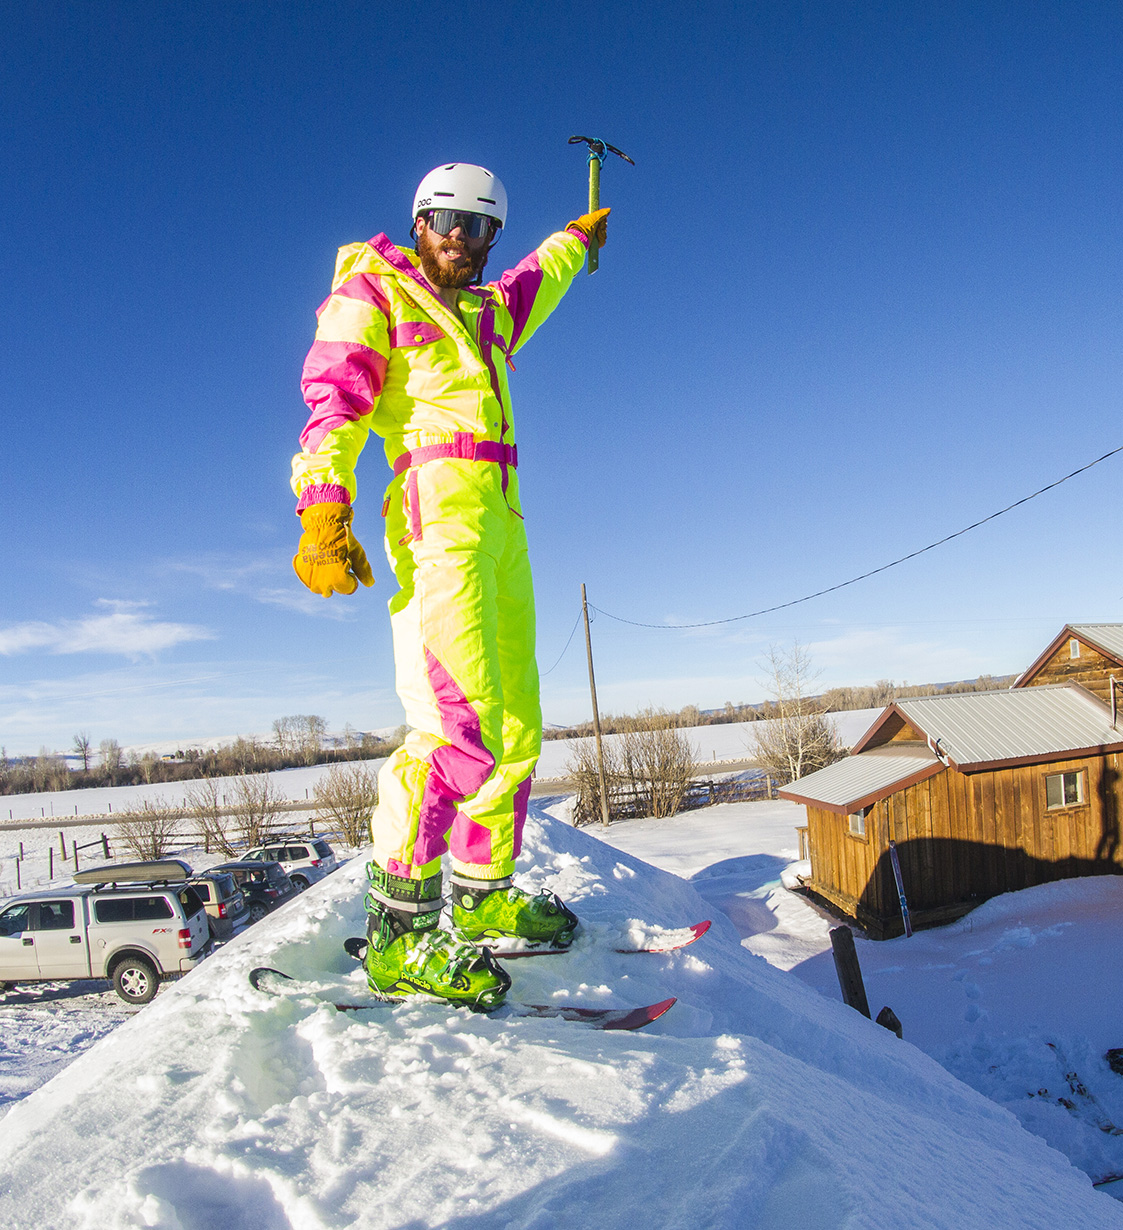 Cy Whitling reviews the Tipsy Elves Powder Blaster Onesie Ski Suit for Blister Gear Review.